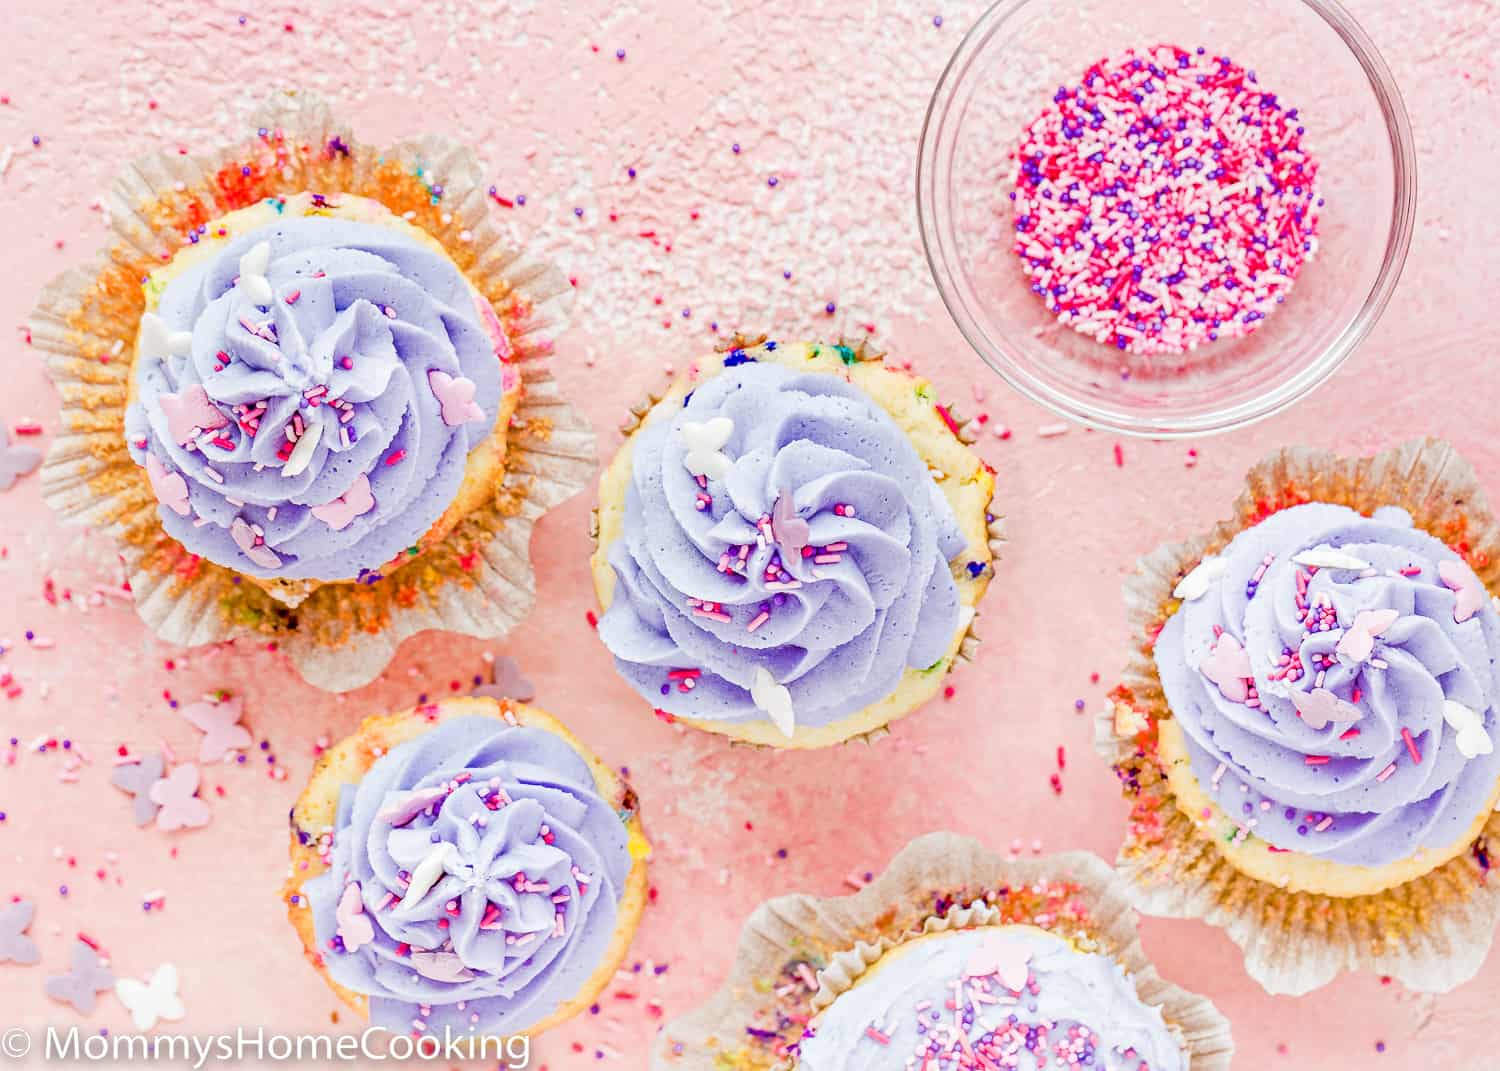 Eggless Funfetti Cupcakes over a pink surface with sprinkles and butter cream on top.